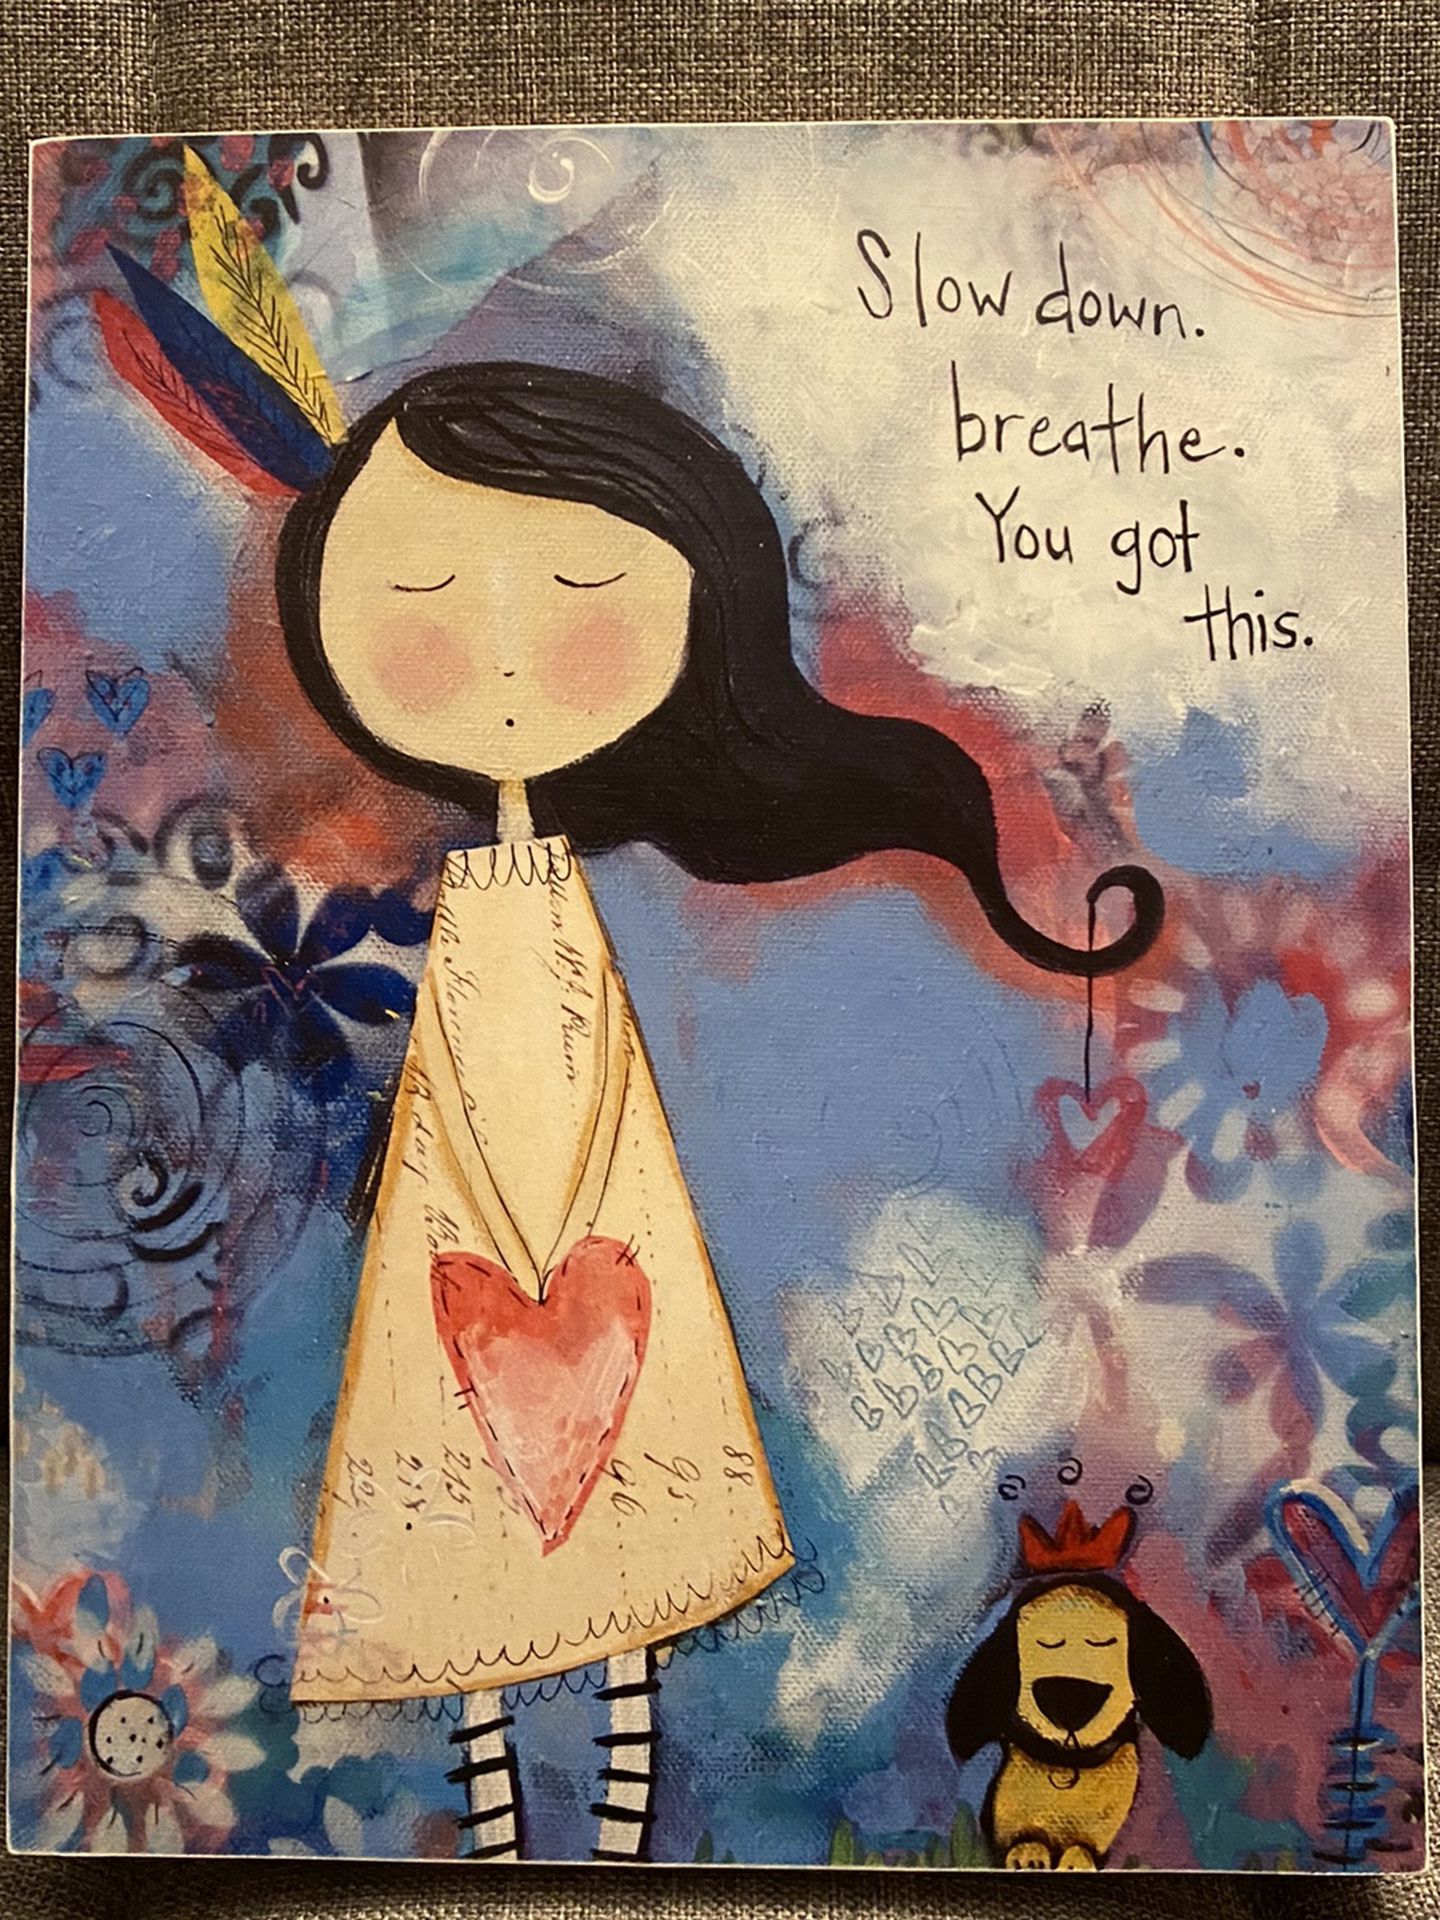 Slow Down Breathe You Got This. Positive Uplifting Art Quote